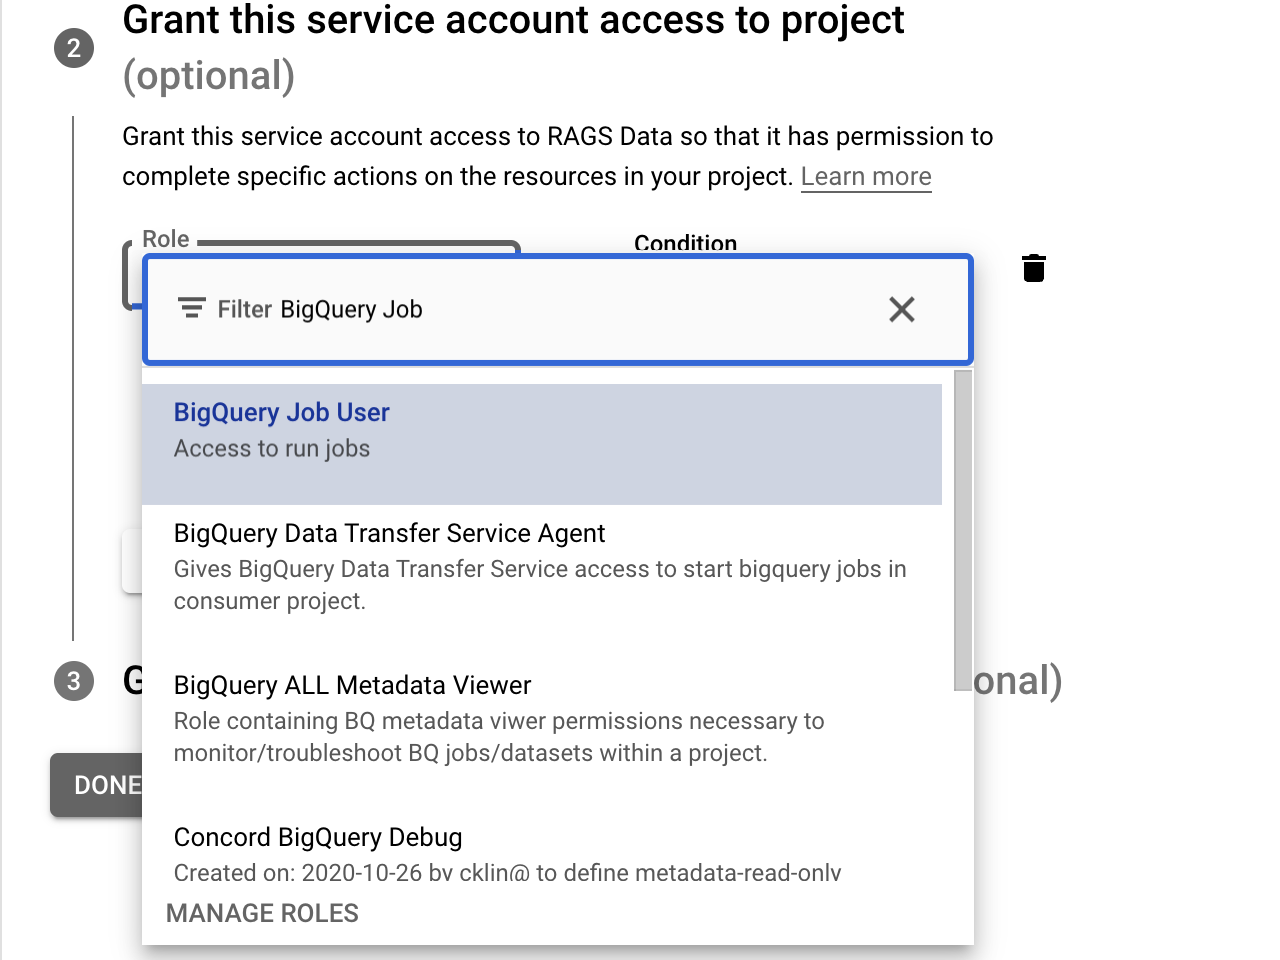 Granting a service account access to a project. In this example, the user has typed "BigQuery Job" in the filter box and selected the BigQuery Job User role.